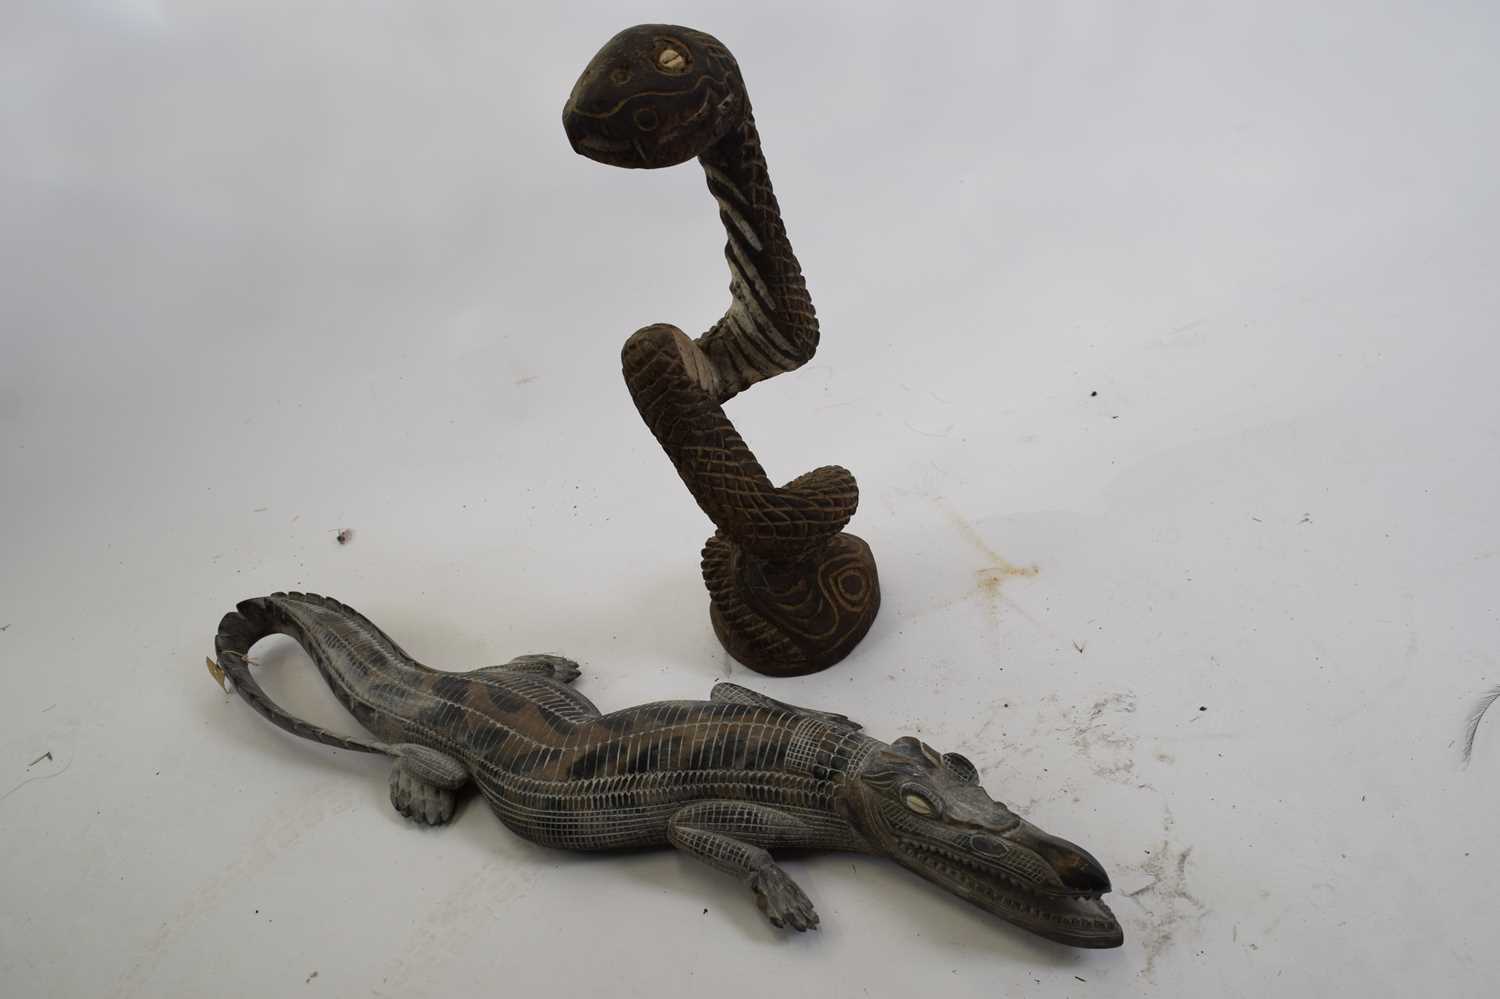 Tribal/ethnographica interest - Papua New Guinea floor standing wooden model of a snake with inset